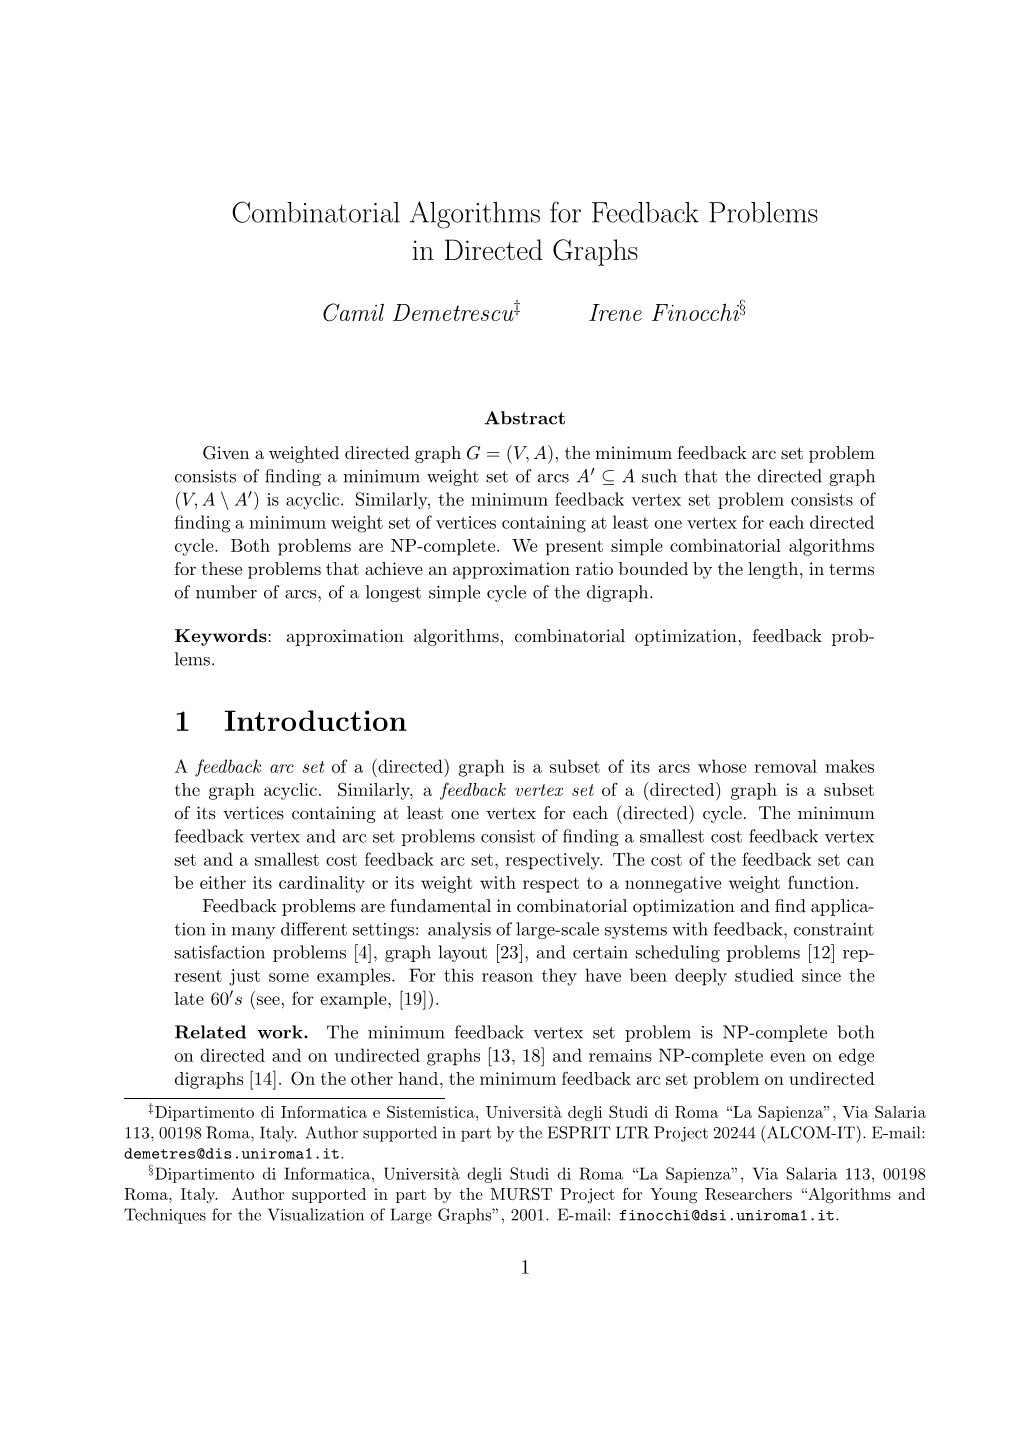 Combinatorial Algorithms for Feedback Problems in Directed Graphs 1 Introduction